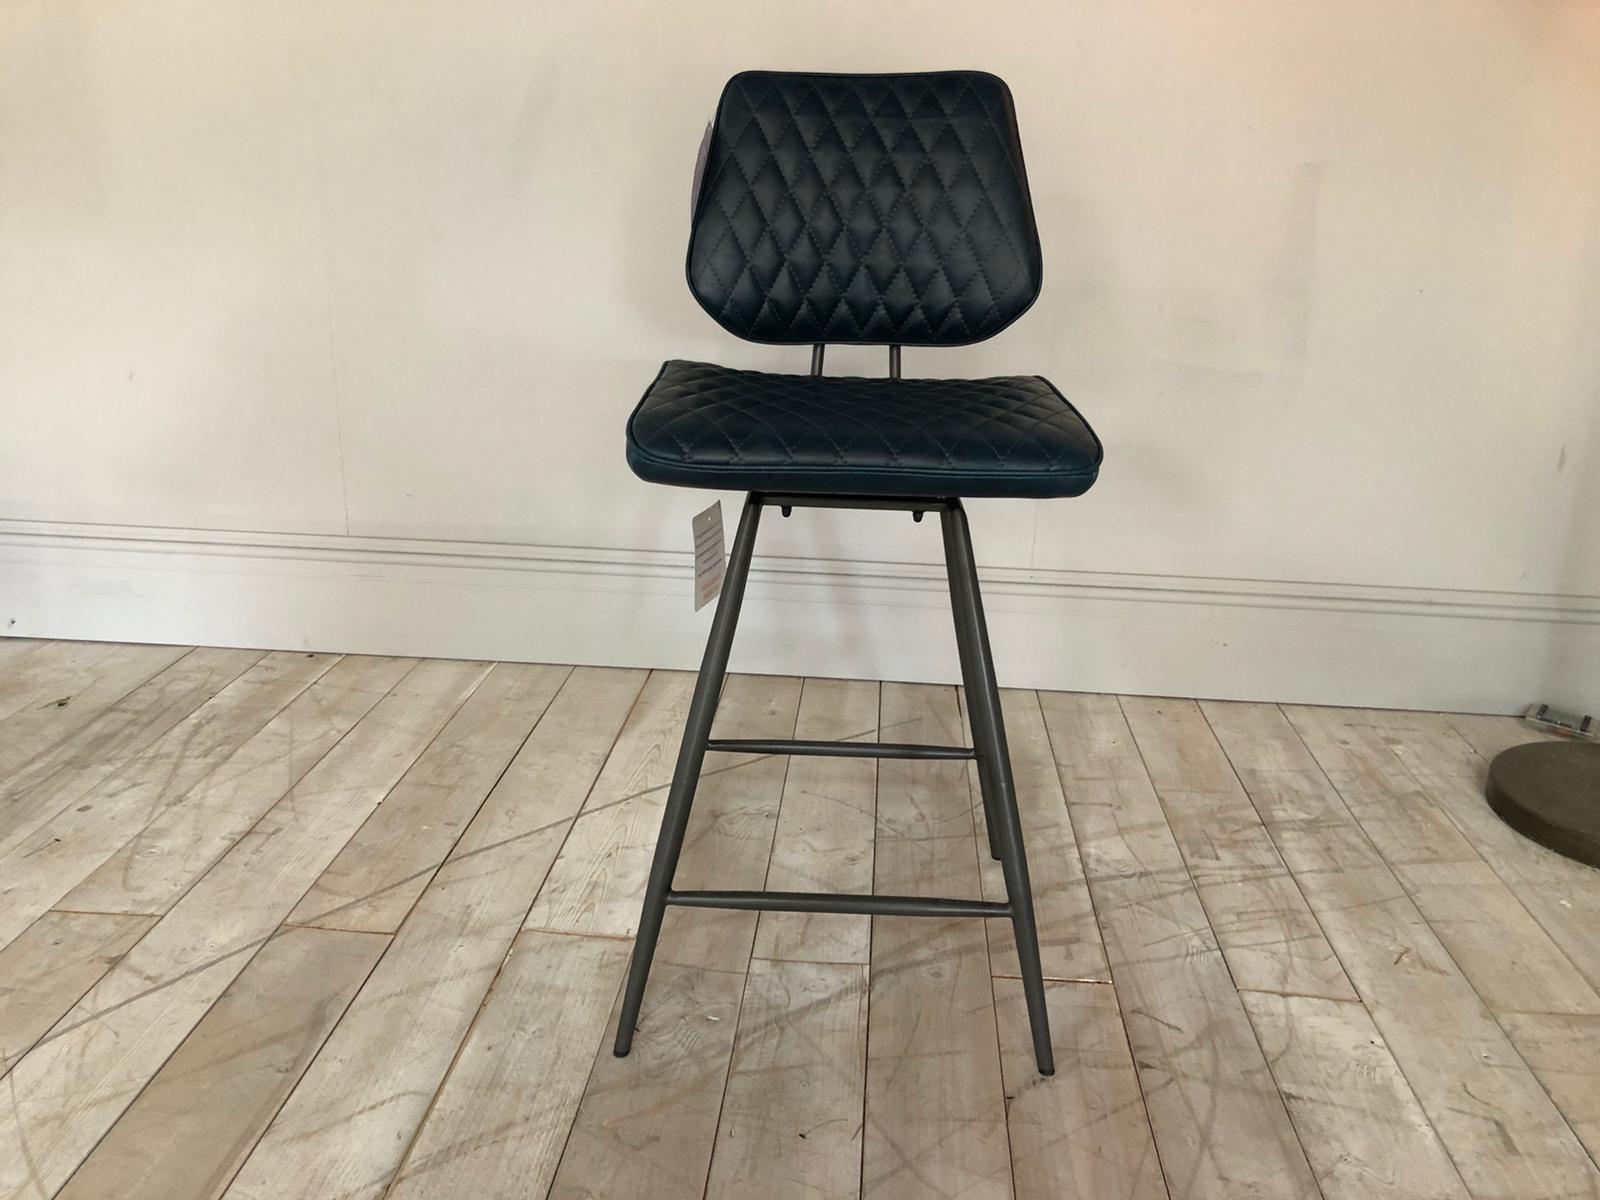 Dalton high back bar stool available from Top Secret Furniture